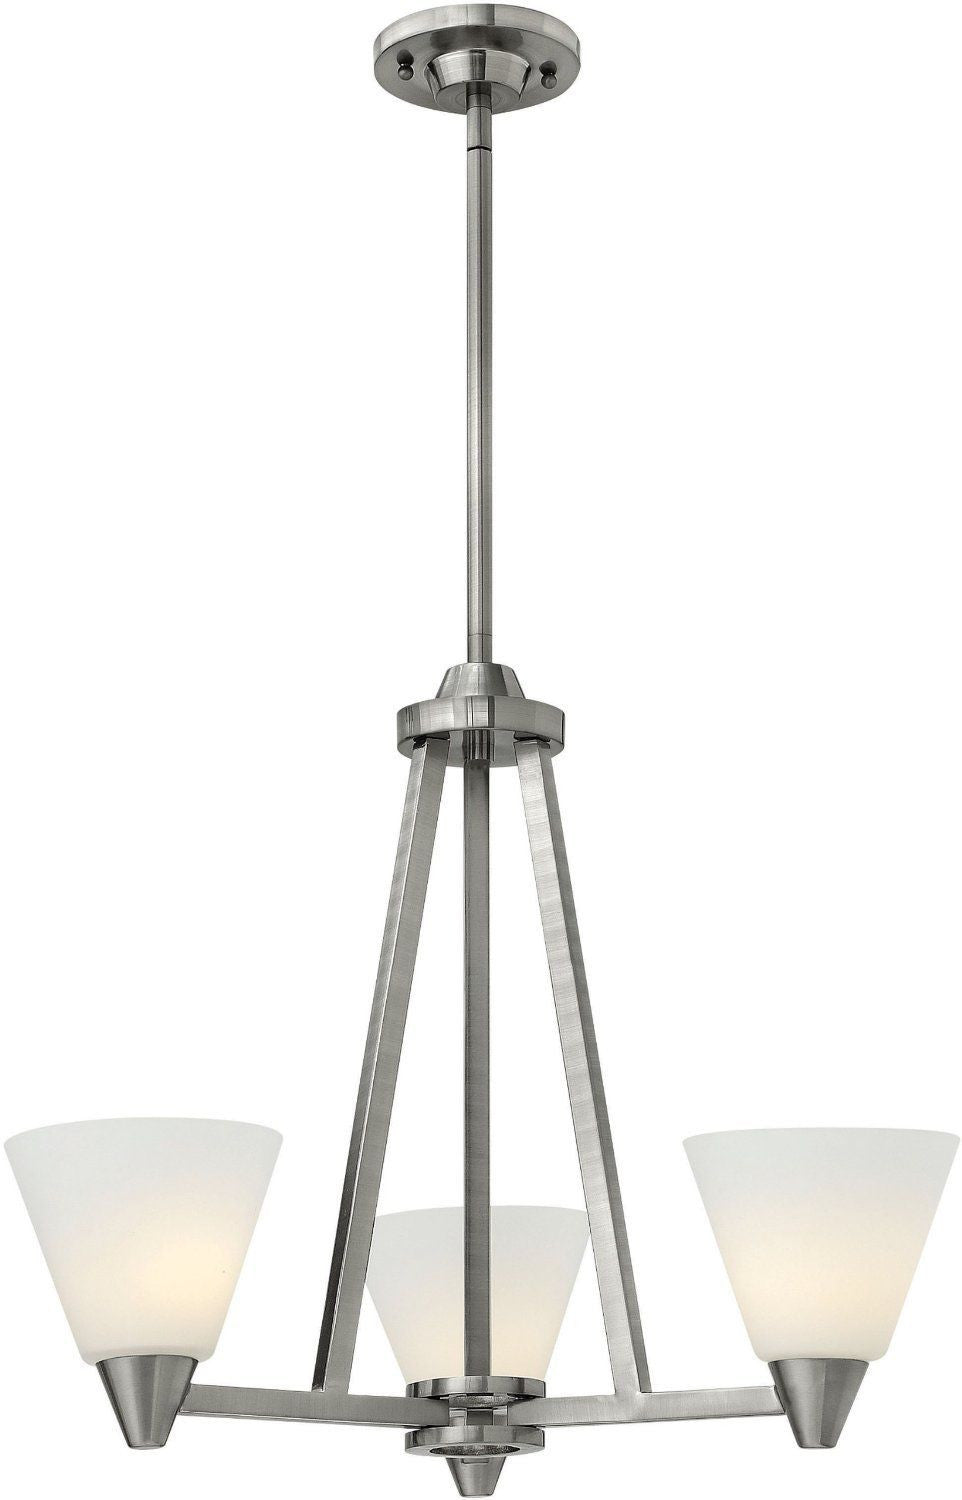 Hinkley Lighting 3663 BN Dillon Collection Three Light Hanging Chandelier in Brushed Nickel Finish